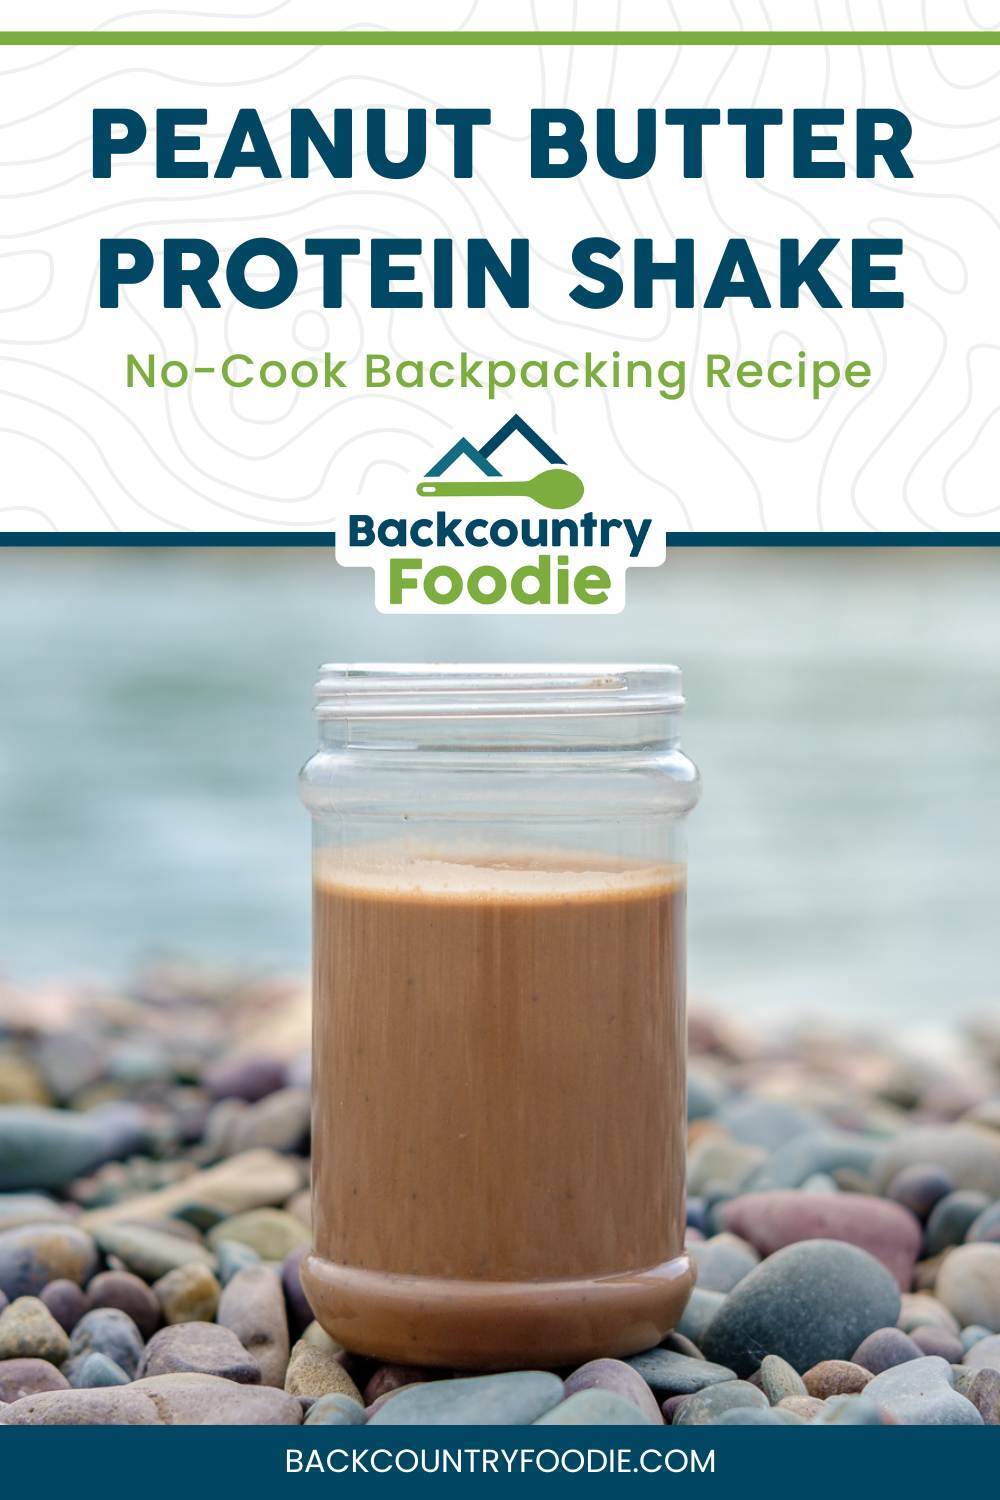 Peanut butter protein shake in a plastic jar